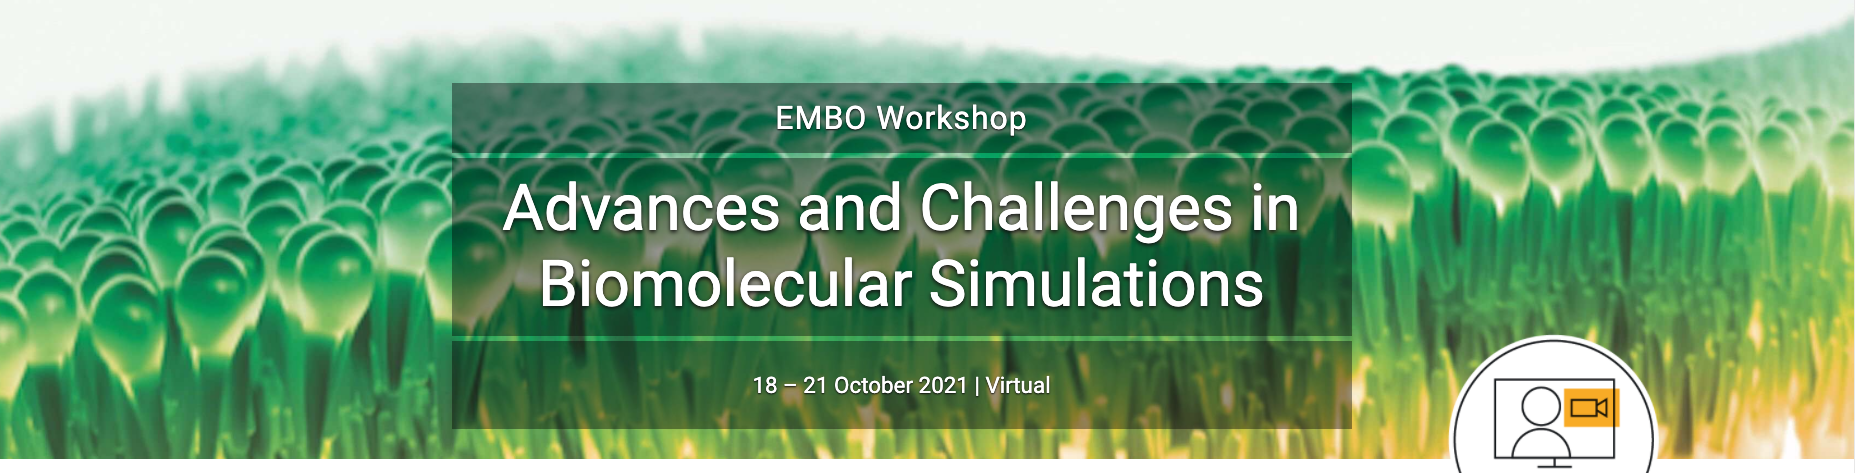 EMBO Workshop is organising the Advances and Challenges in Biomolecular Simulations conference